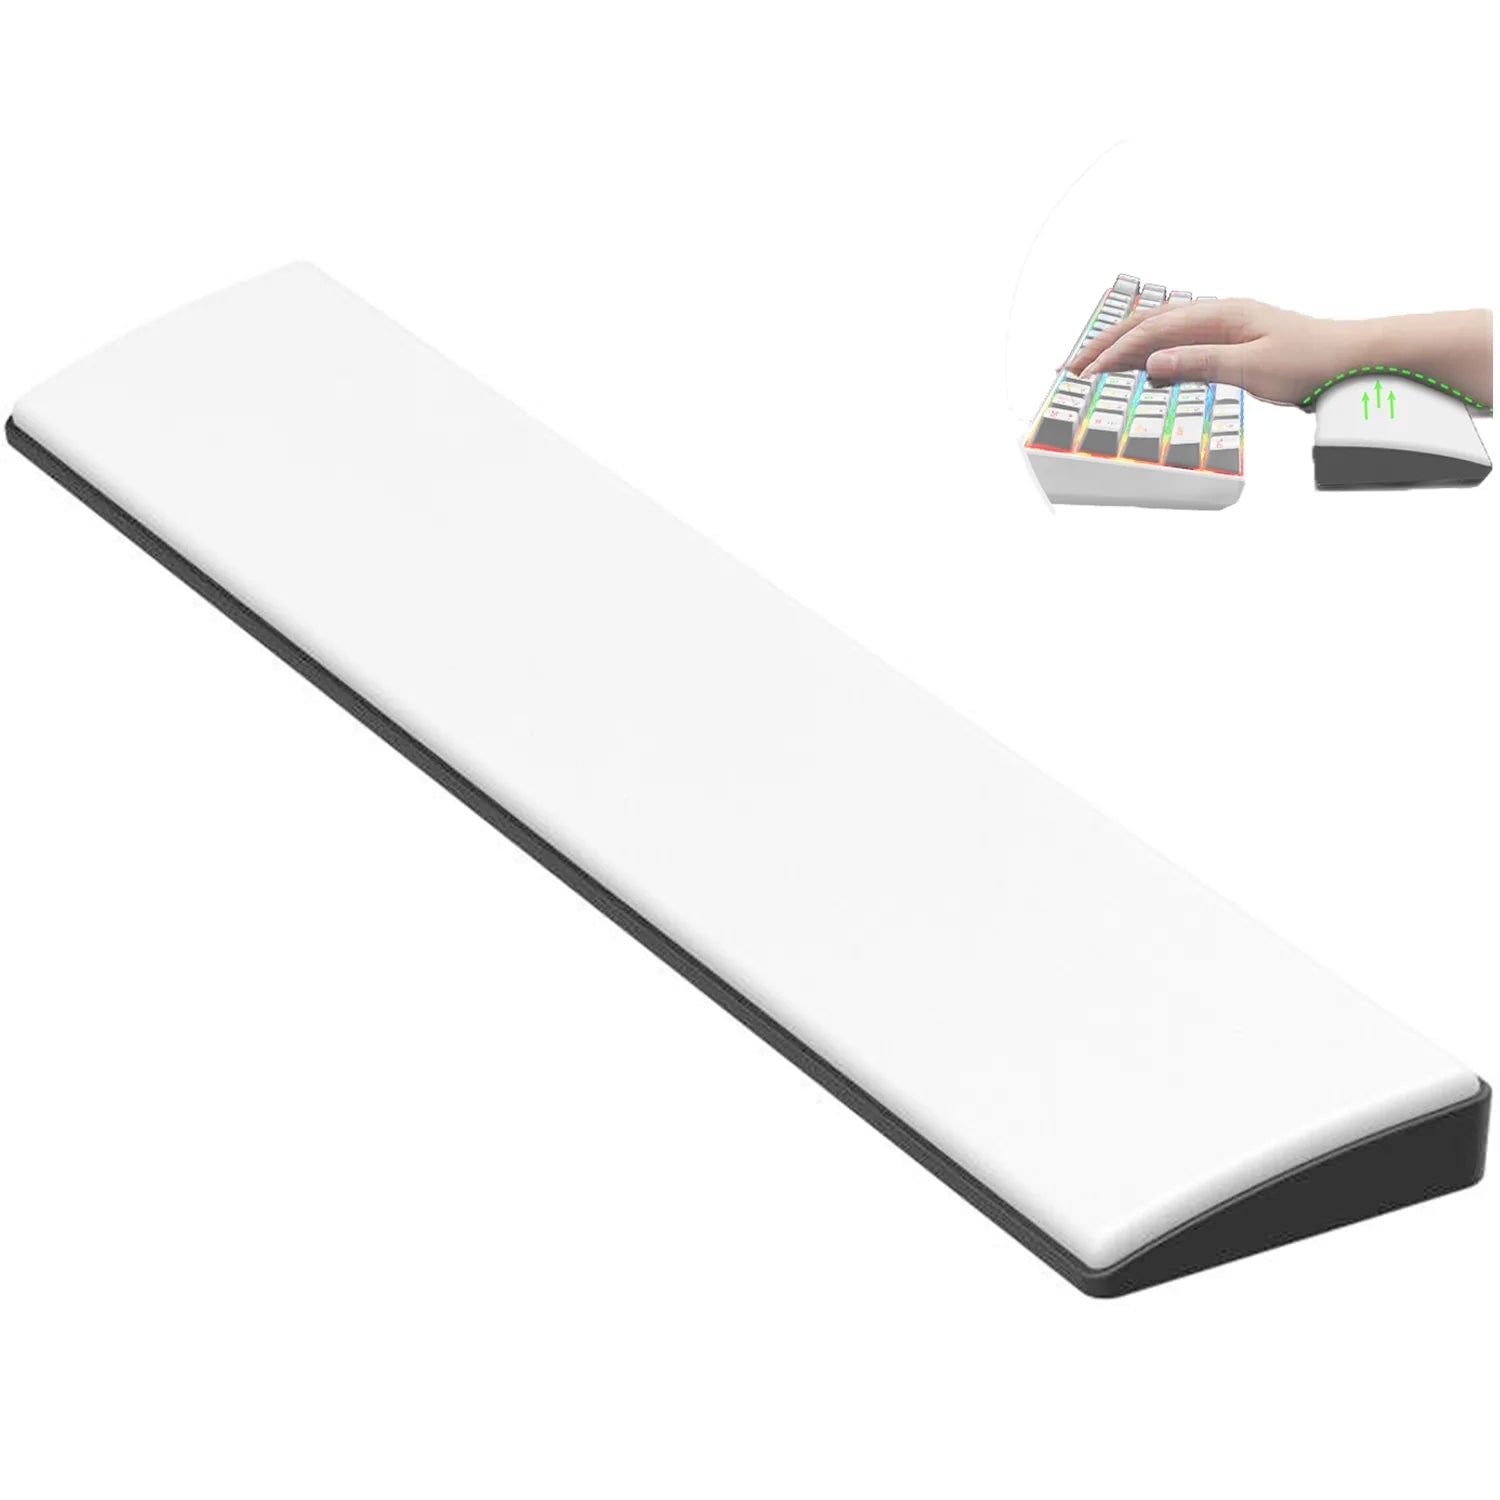 Ajazz Wrist pad white 104key - I Gaming Computer | Australia Wide Shipping | Buy now, Pay Later with Afterpay, Klarna, Zip, Latitude & Paypal